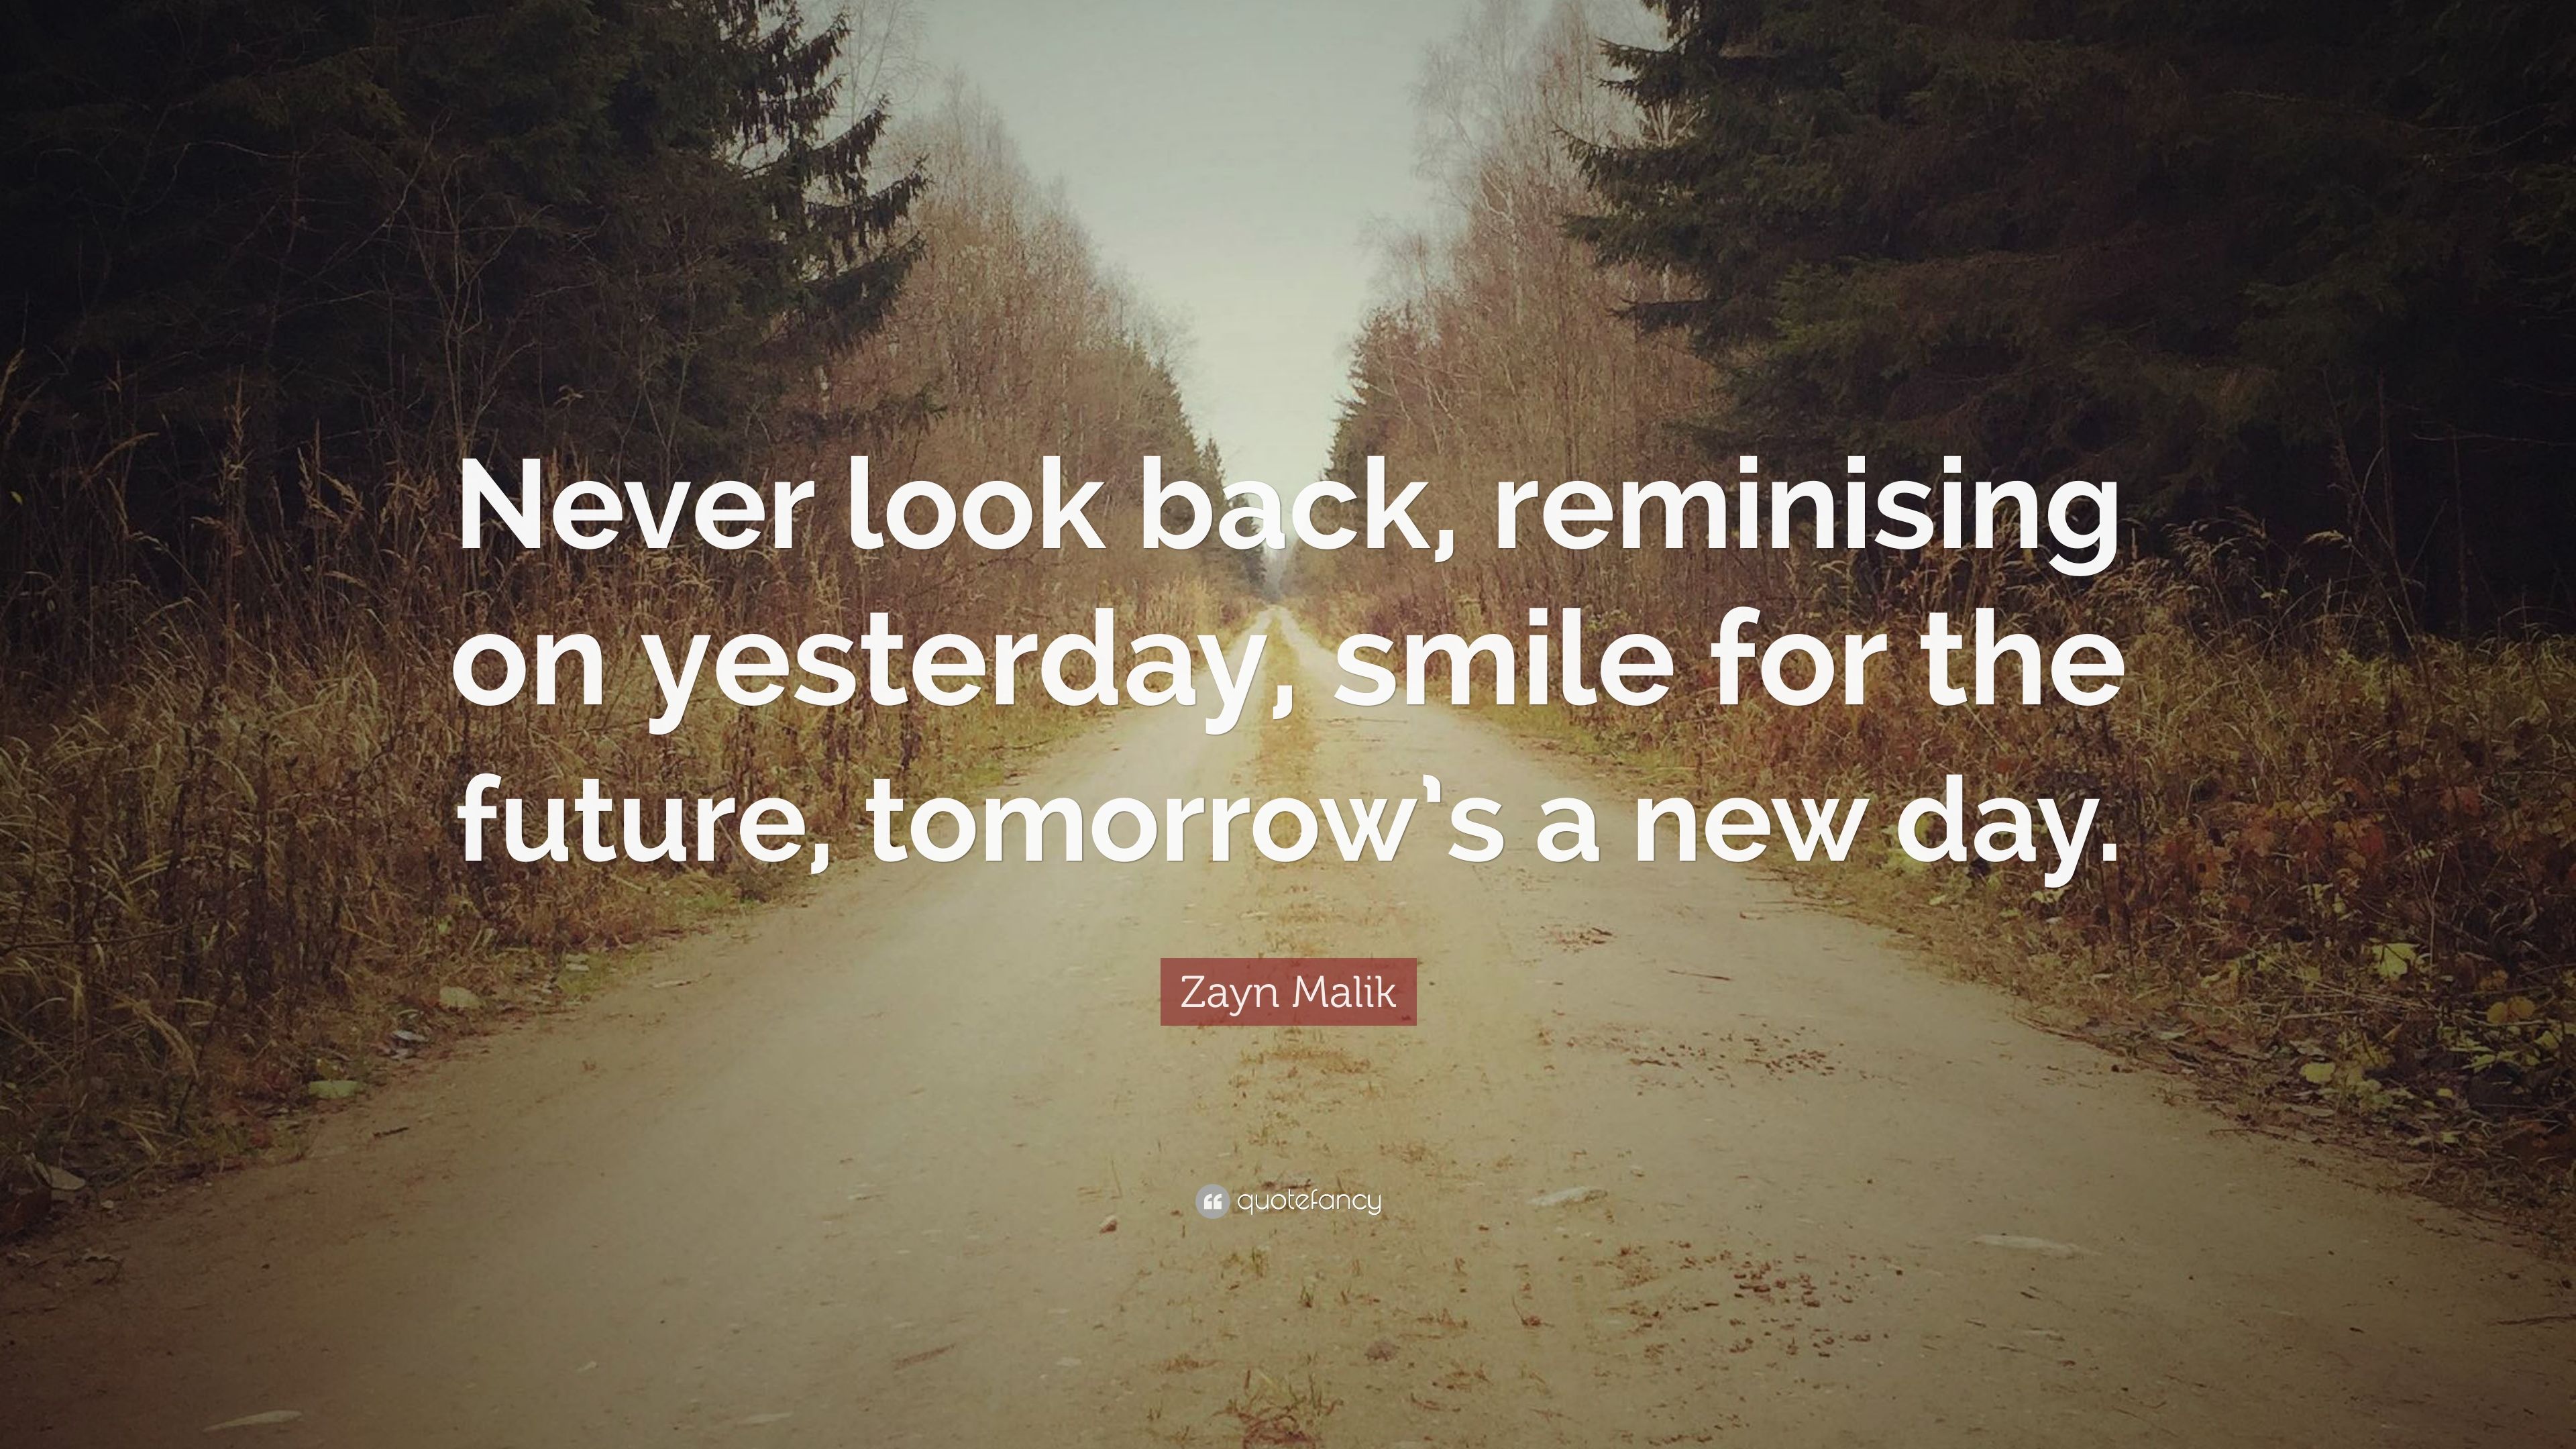 Zayn Malik Quote: “Never look back, reminising on yesterday, smile for the future, tomorrow's a new day.” (12 wallpaper)